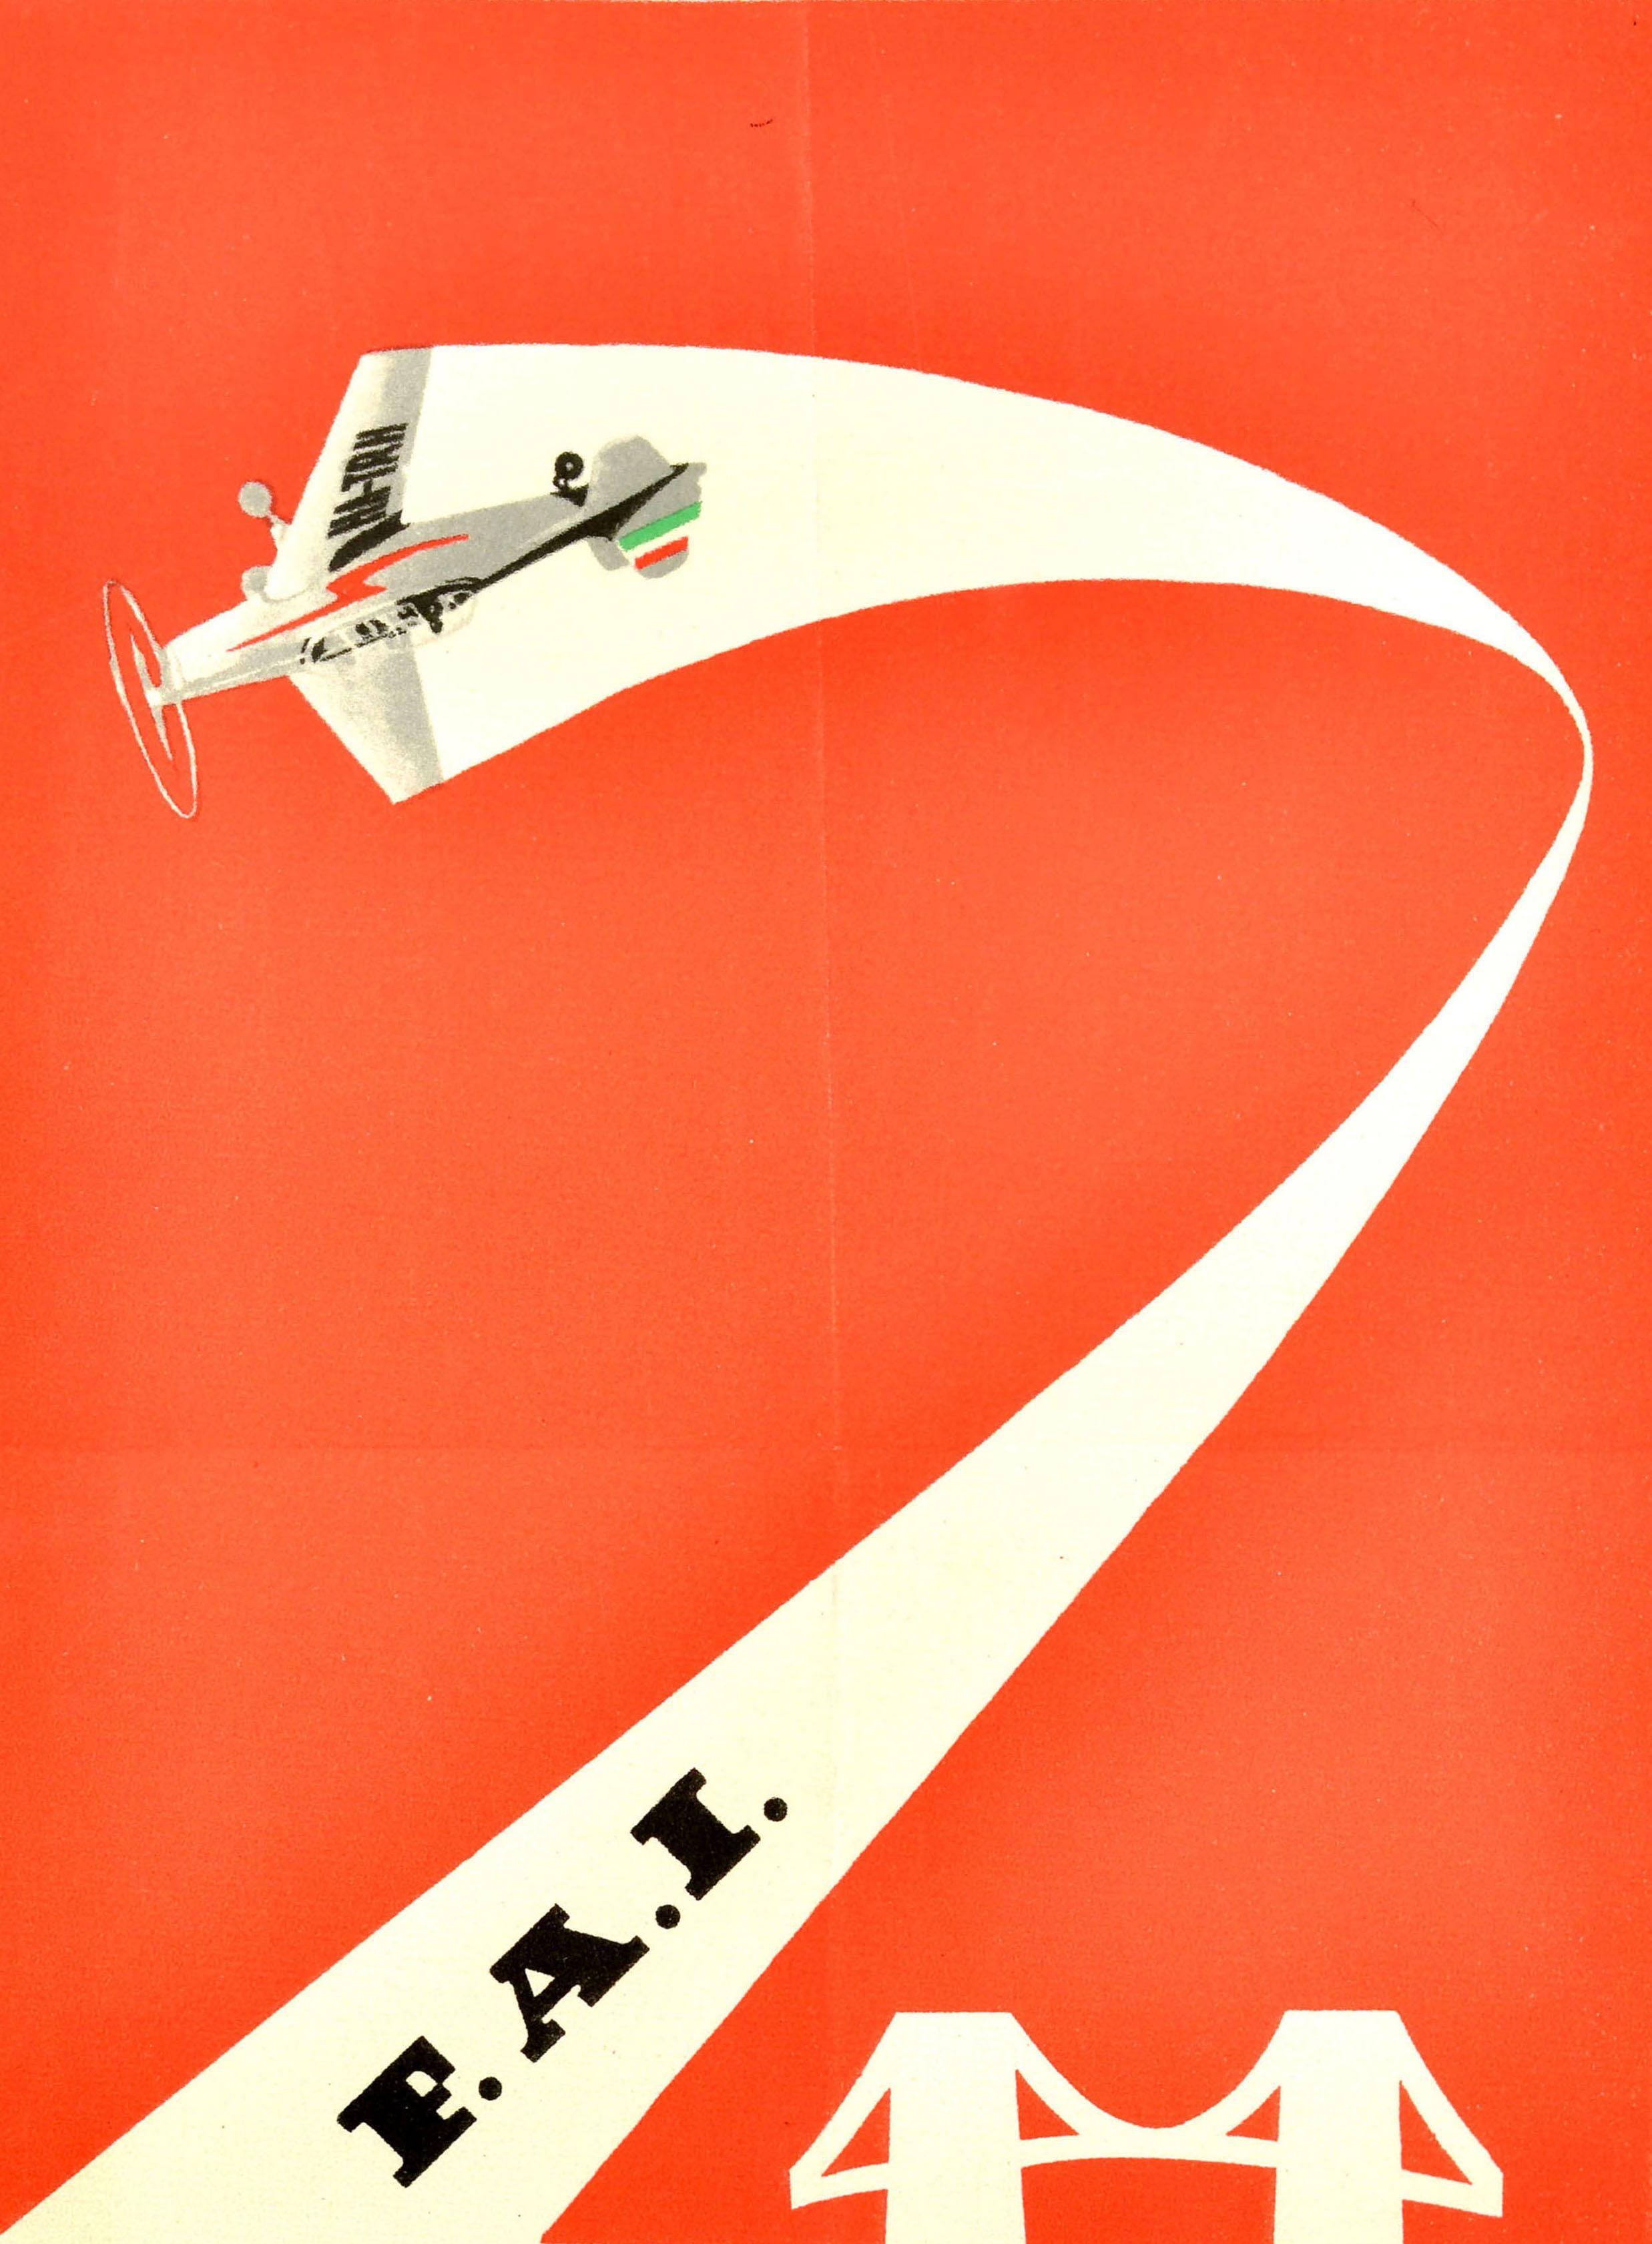 Original vintage advertising poster for the Kecskemet International Air Show / FAI Nemzetkozi Repulonap a Ferihegyi Repuloteren on 29 July 1962 featuring a colourful graphic design depicting a propeller plane flying in a curve above a bridge on a